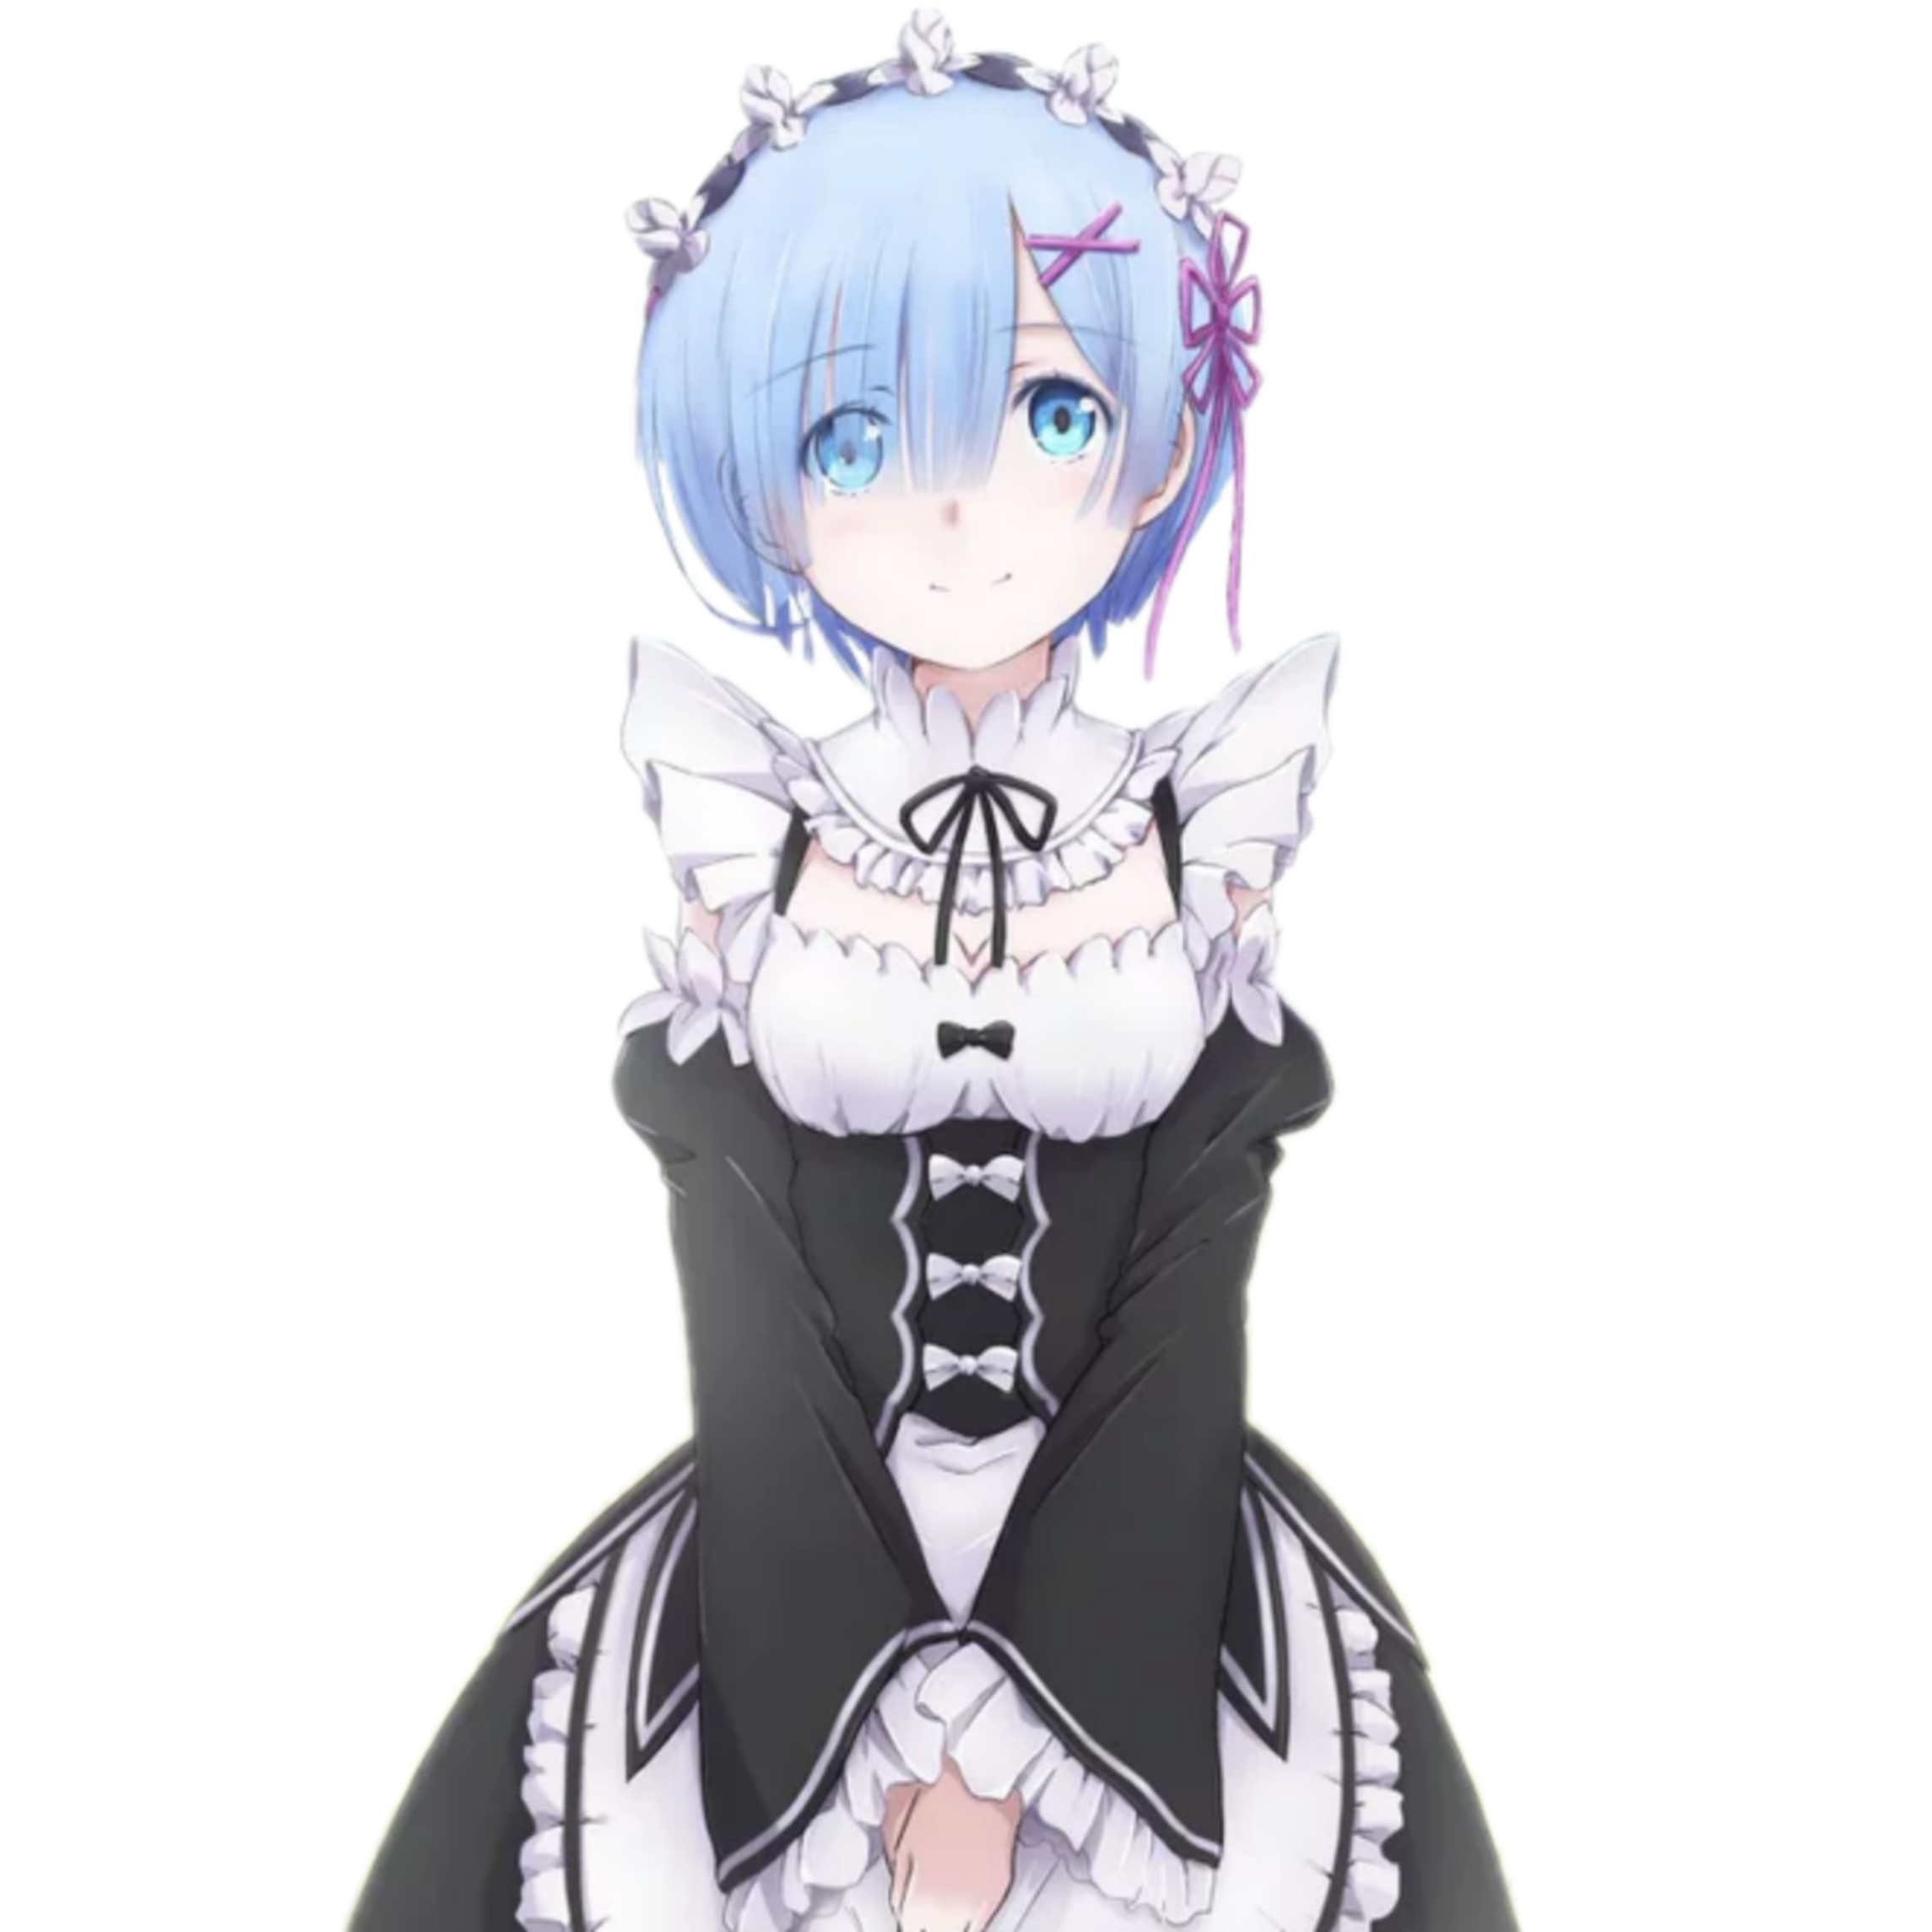 This visual is about rem freetoedit #rem.